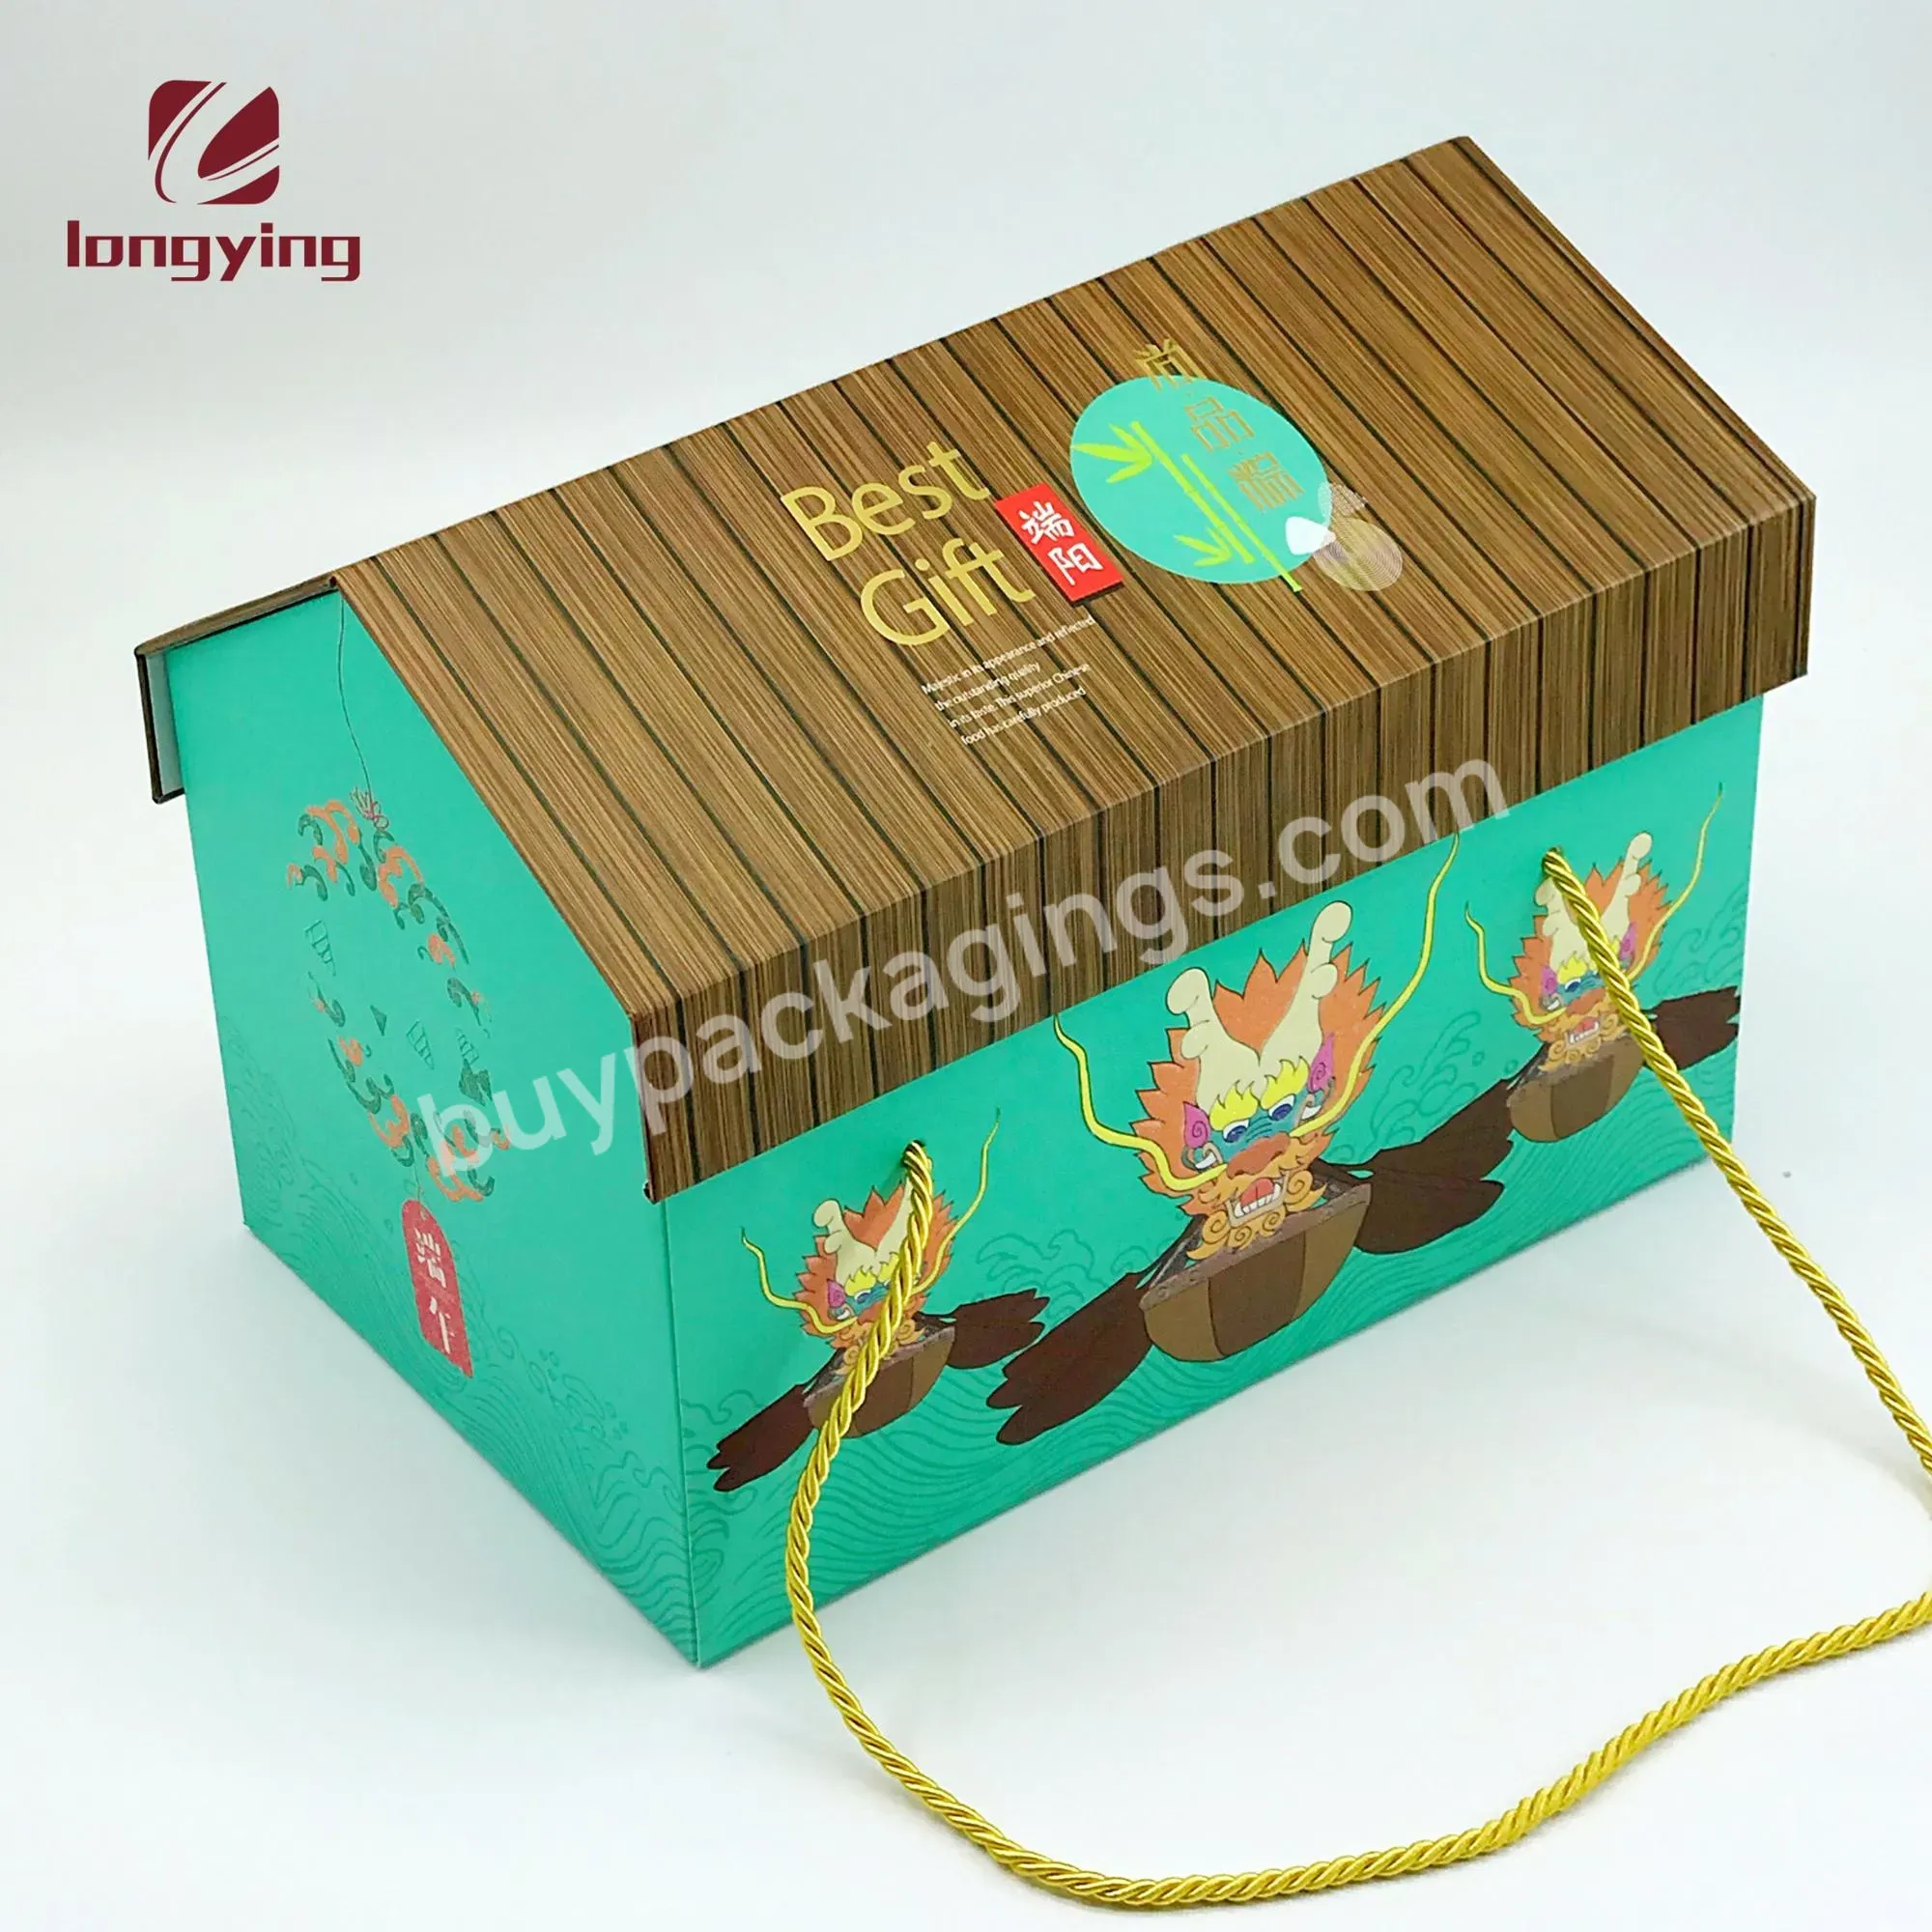 New Design Creativegiftbox With Handle House Shape Gift Box For Food/toy/storage Box Packaging Boxes